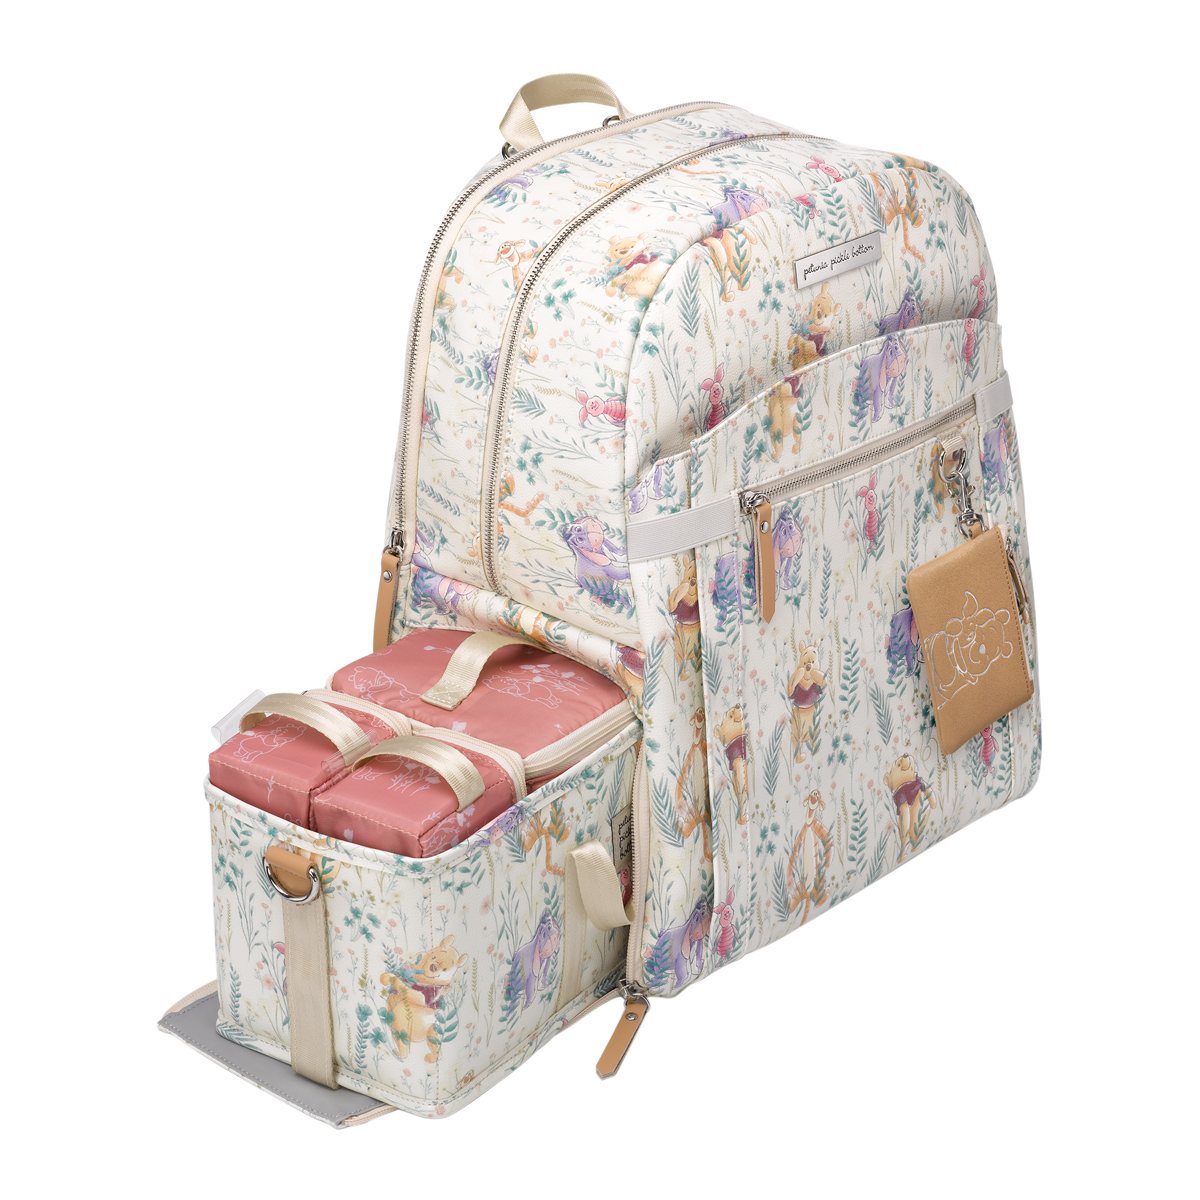 7 Best Diaper Bags for Twins of 2023